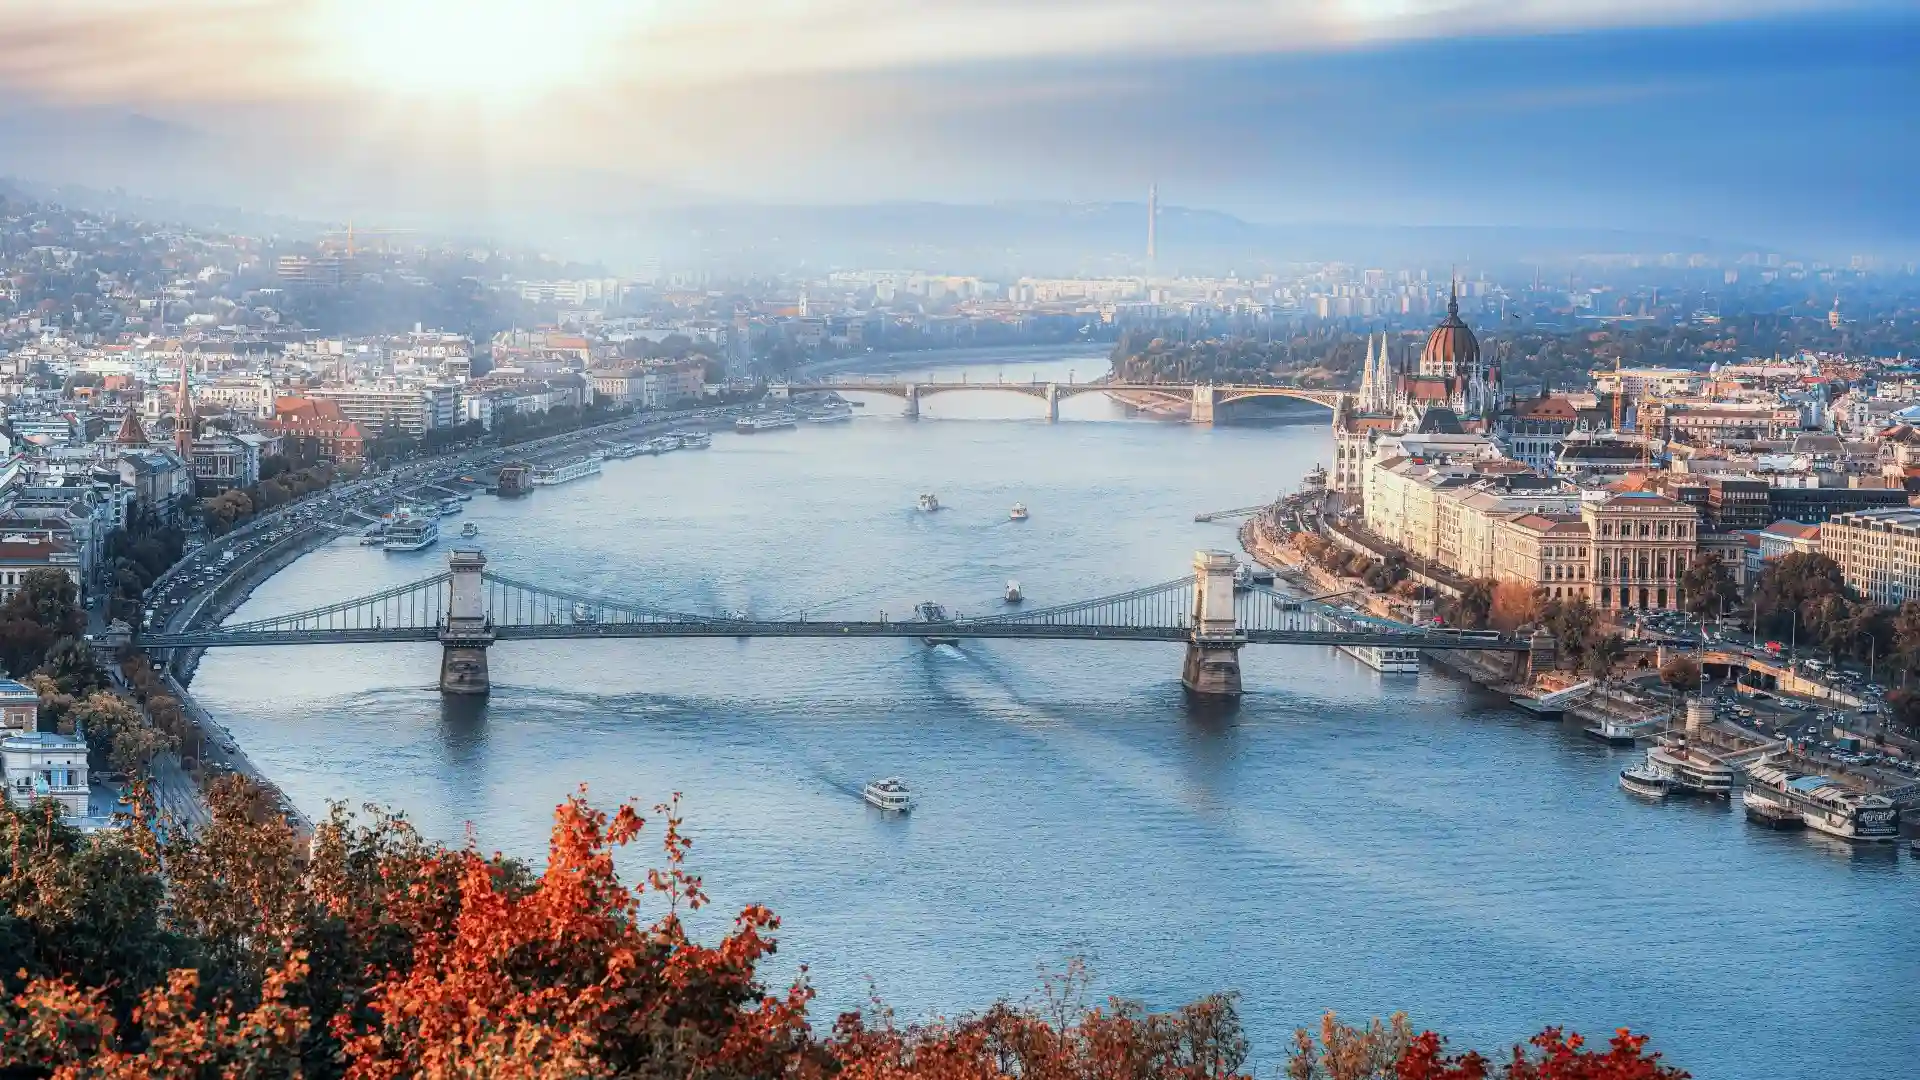 Cities Along the Danube